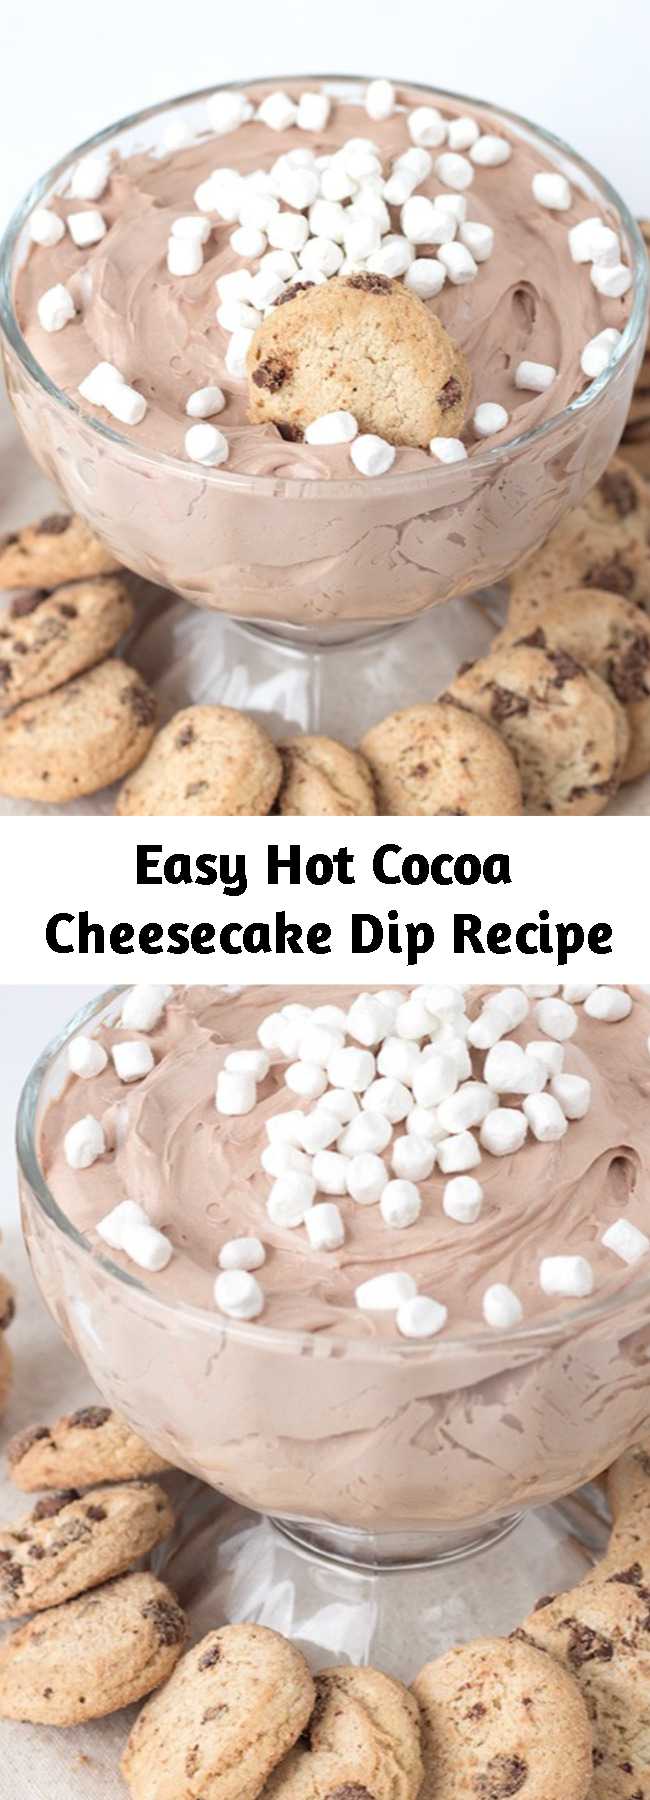 Easy Hot Cocoa Cheesecake Dip Recipe - Have you ever dipped your cookies in hot cocoa? My hot cocoa cheesecake dip is the new and improved version for dipping cookies. It has the most amazing mousse texture and those tiny marshmallows are phenomenal. This Hot Cocoa Cheesecake Dip is just what you need to warm up this winter. 